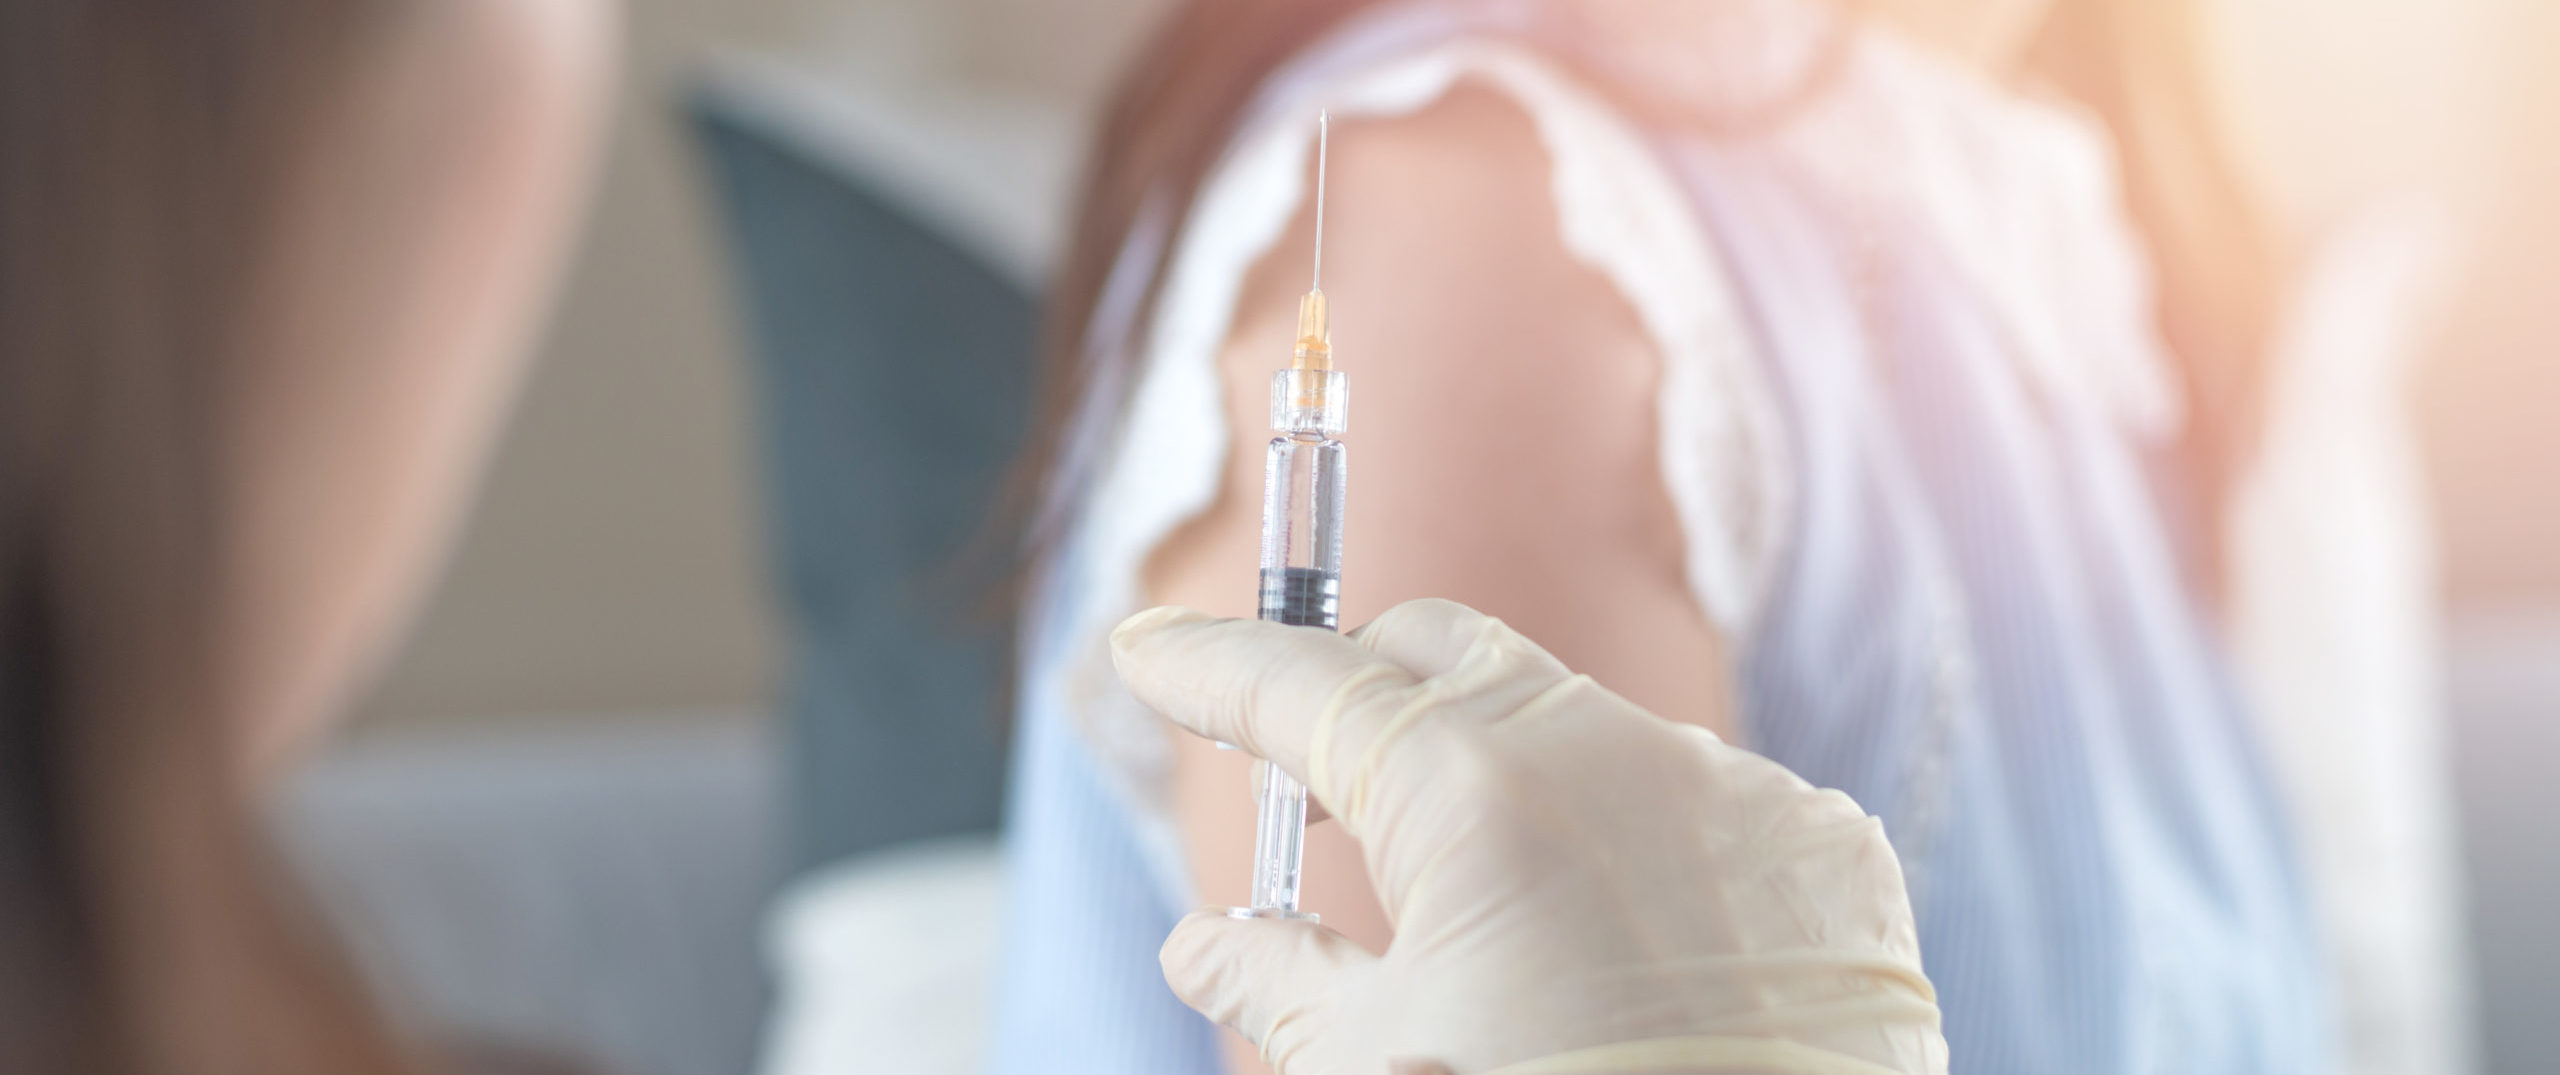 Human Resources: Navigating a COVID-19 Workplace Vaccination Program